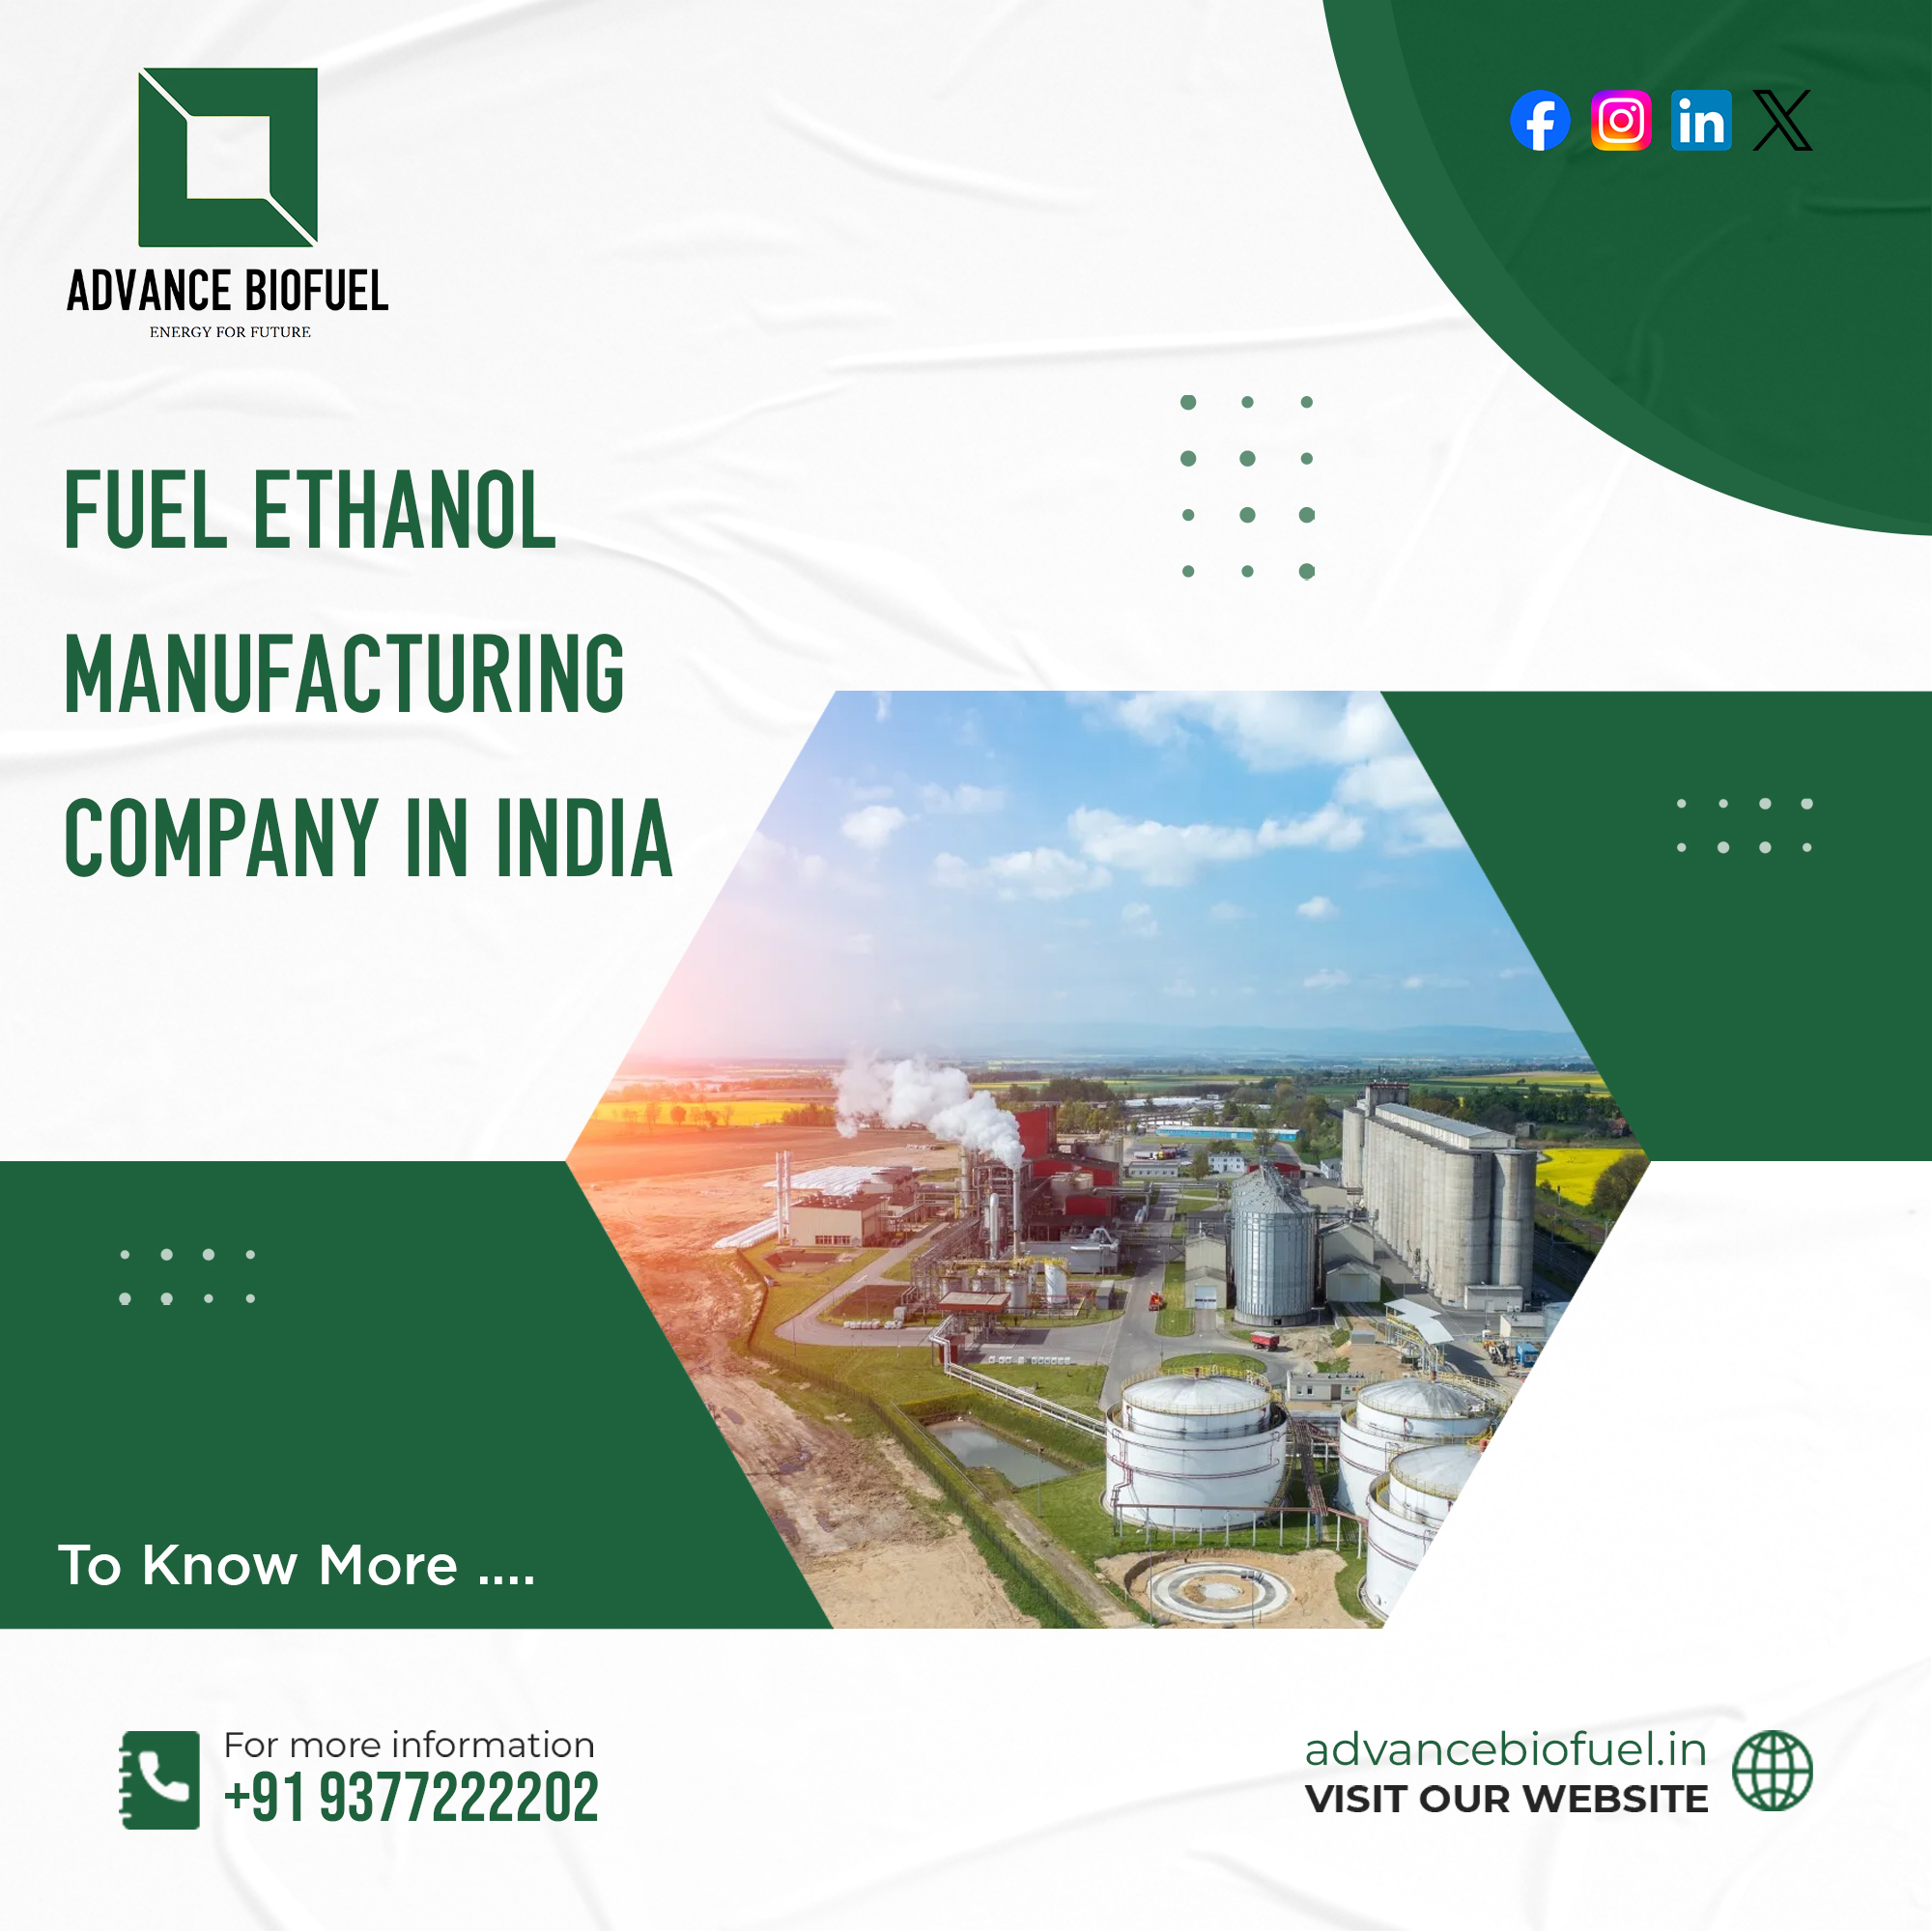 Fuel Ethanol manufacturing company in India